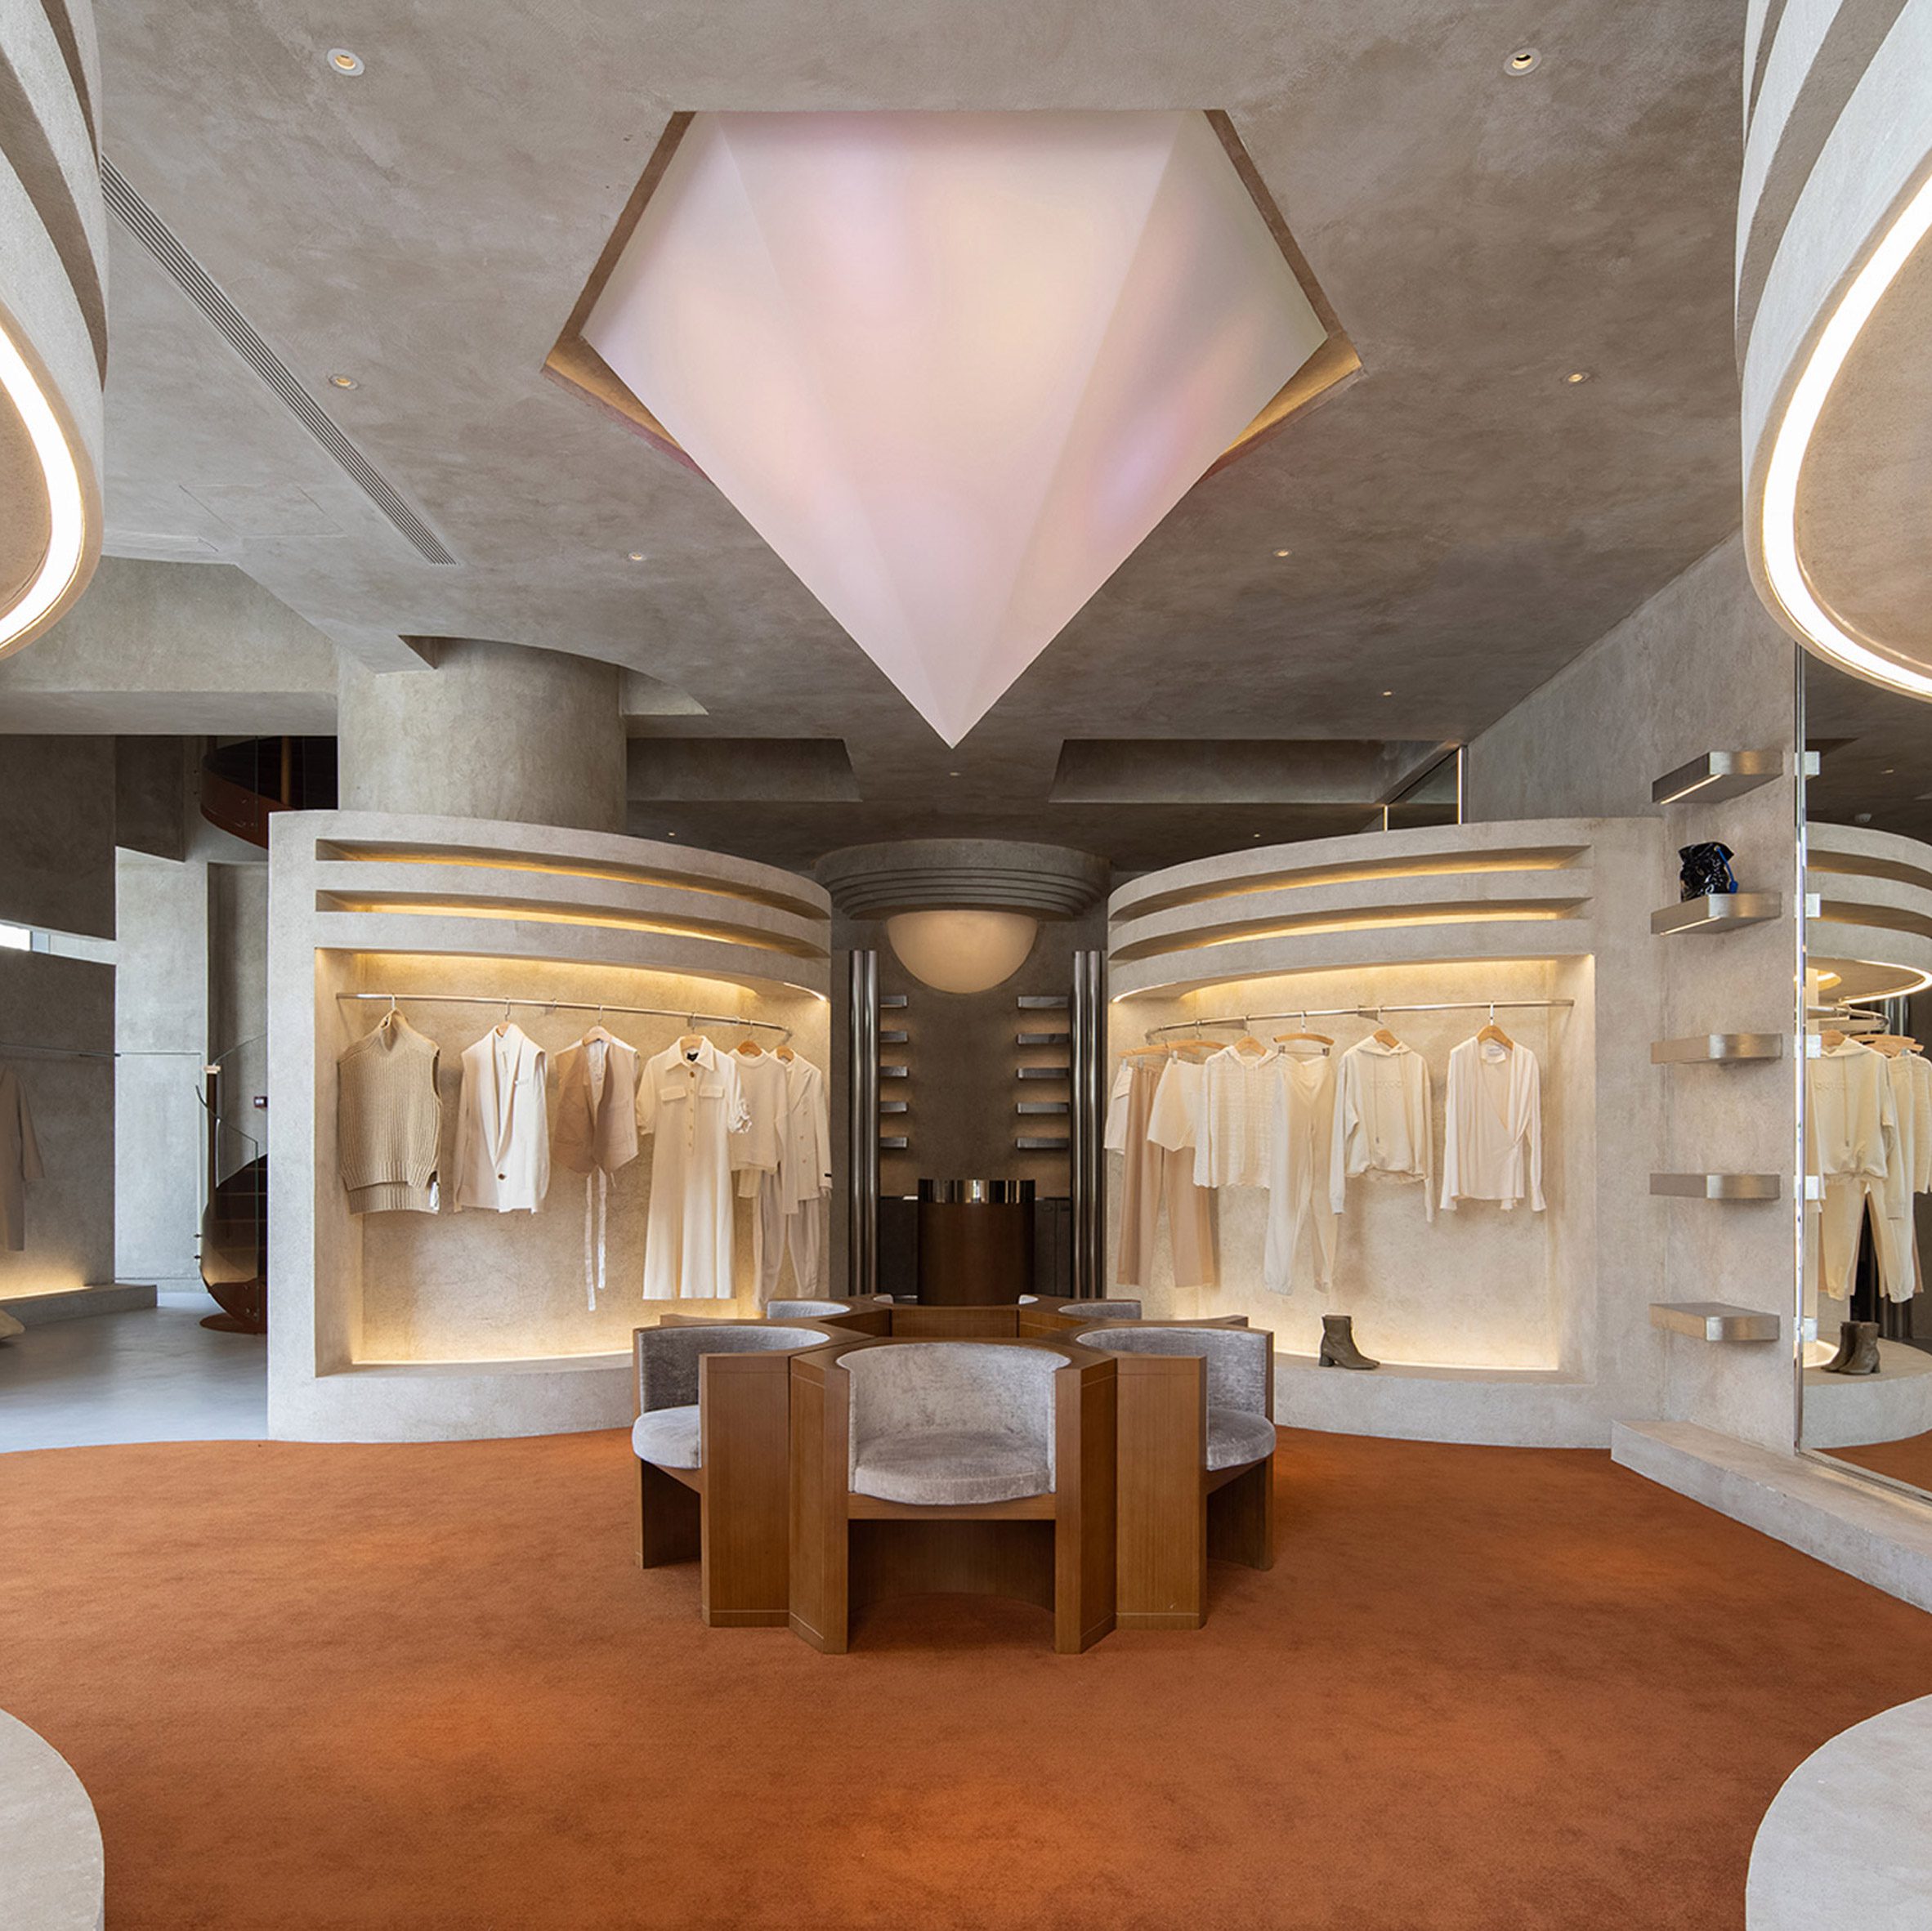 LOUIS VUITTON - The Changing Room